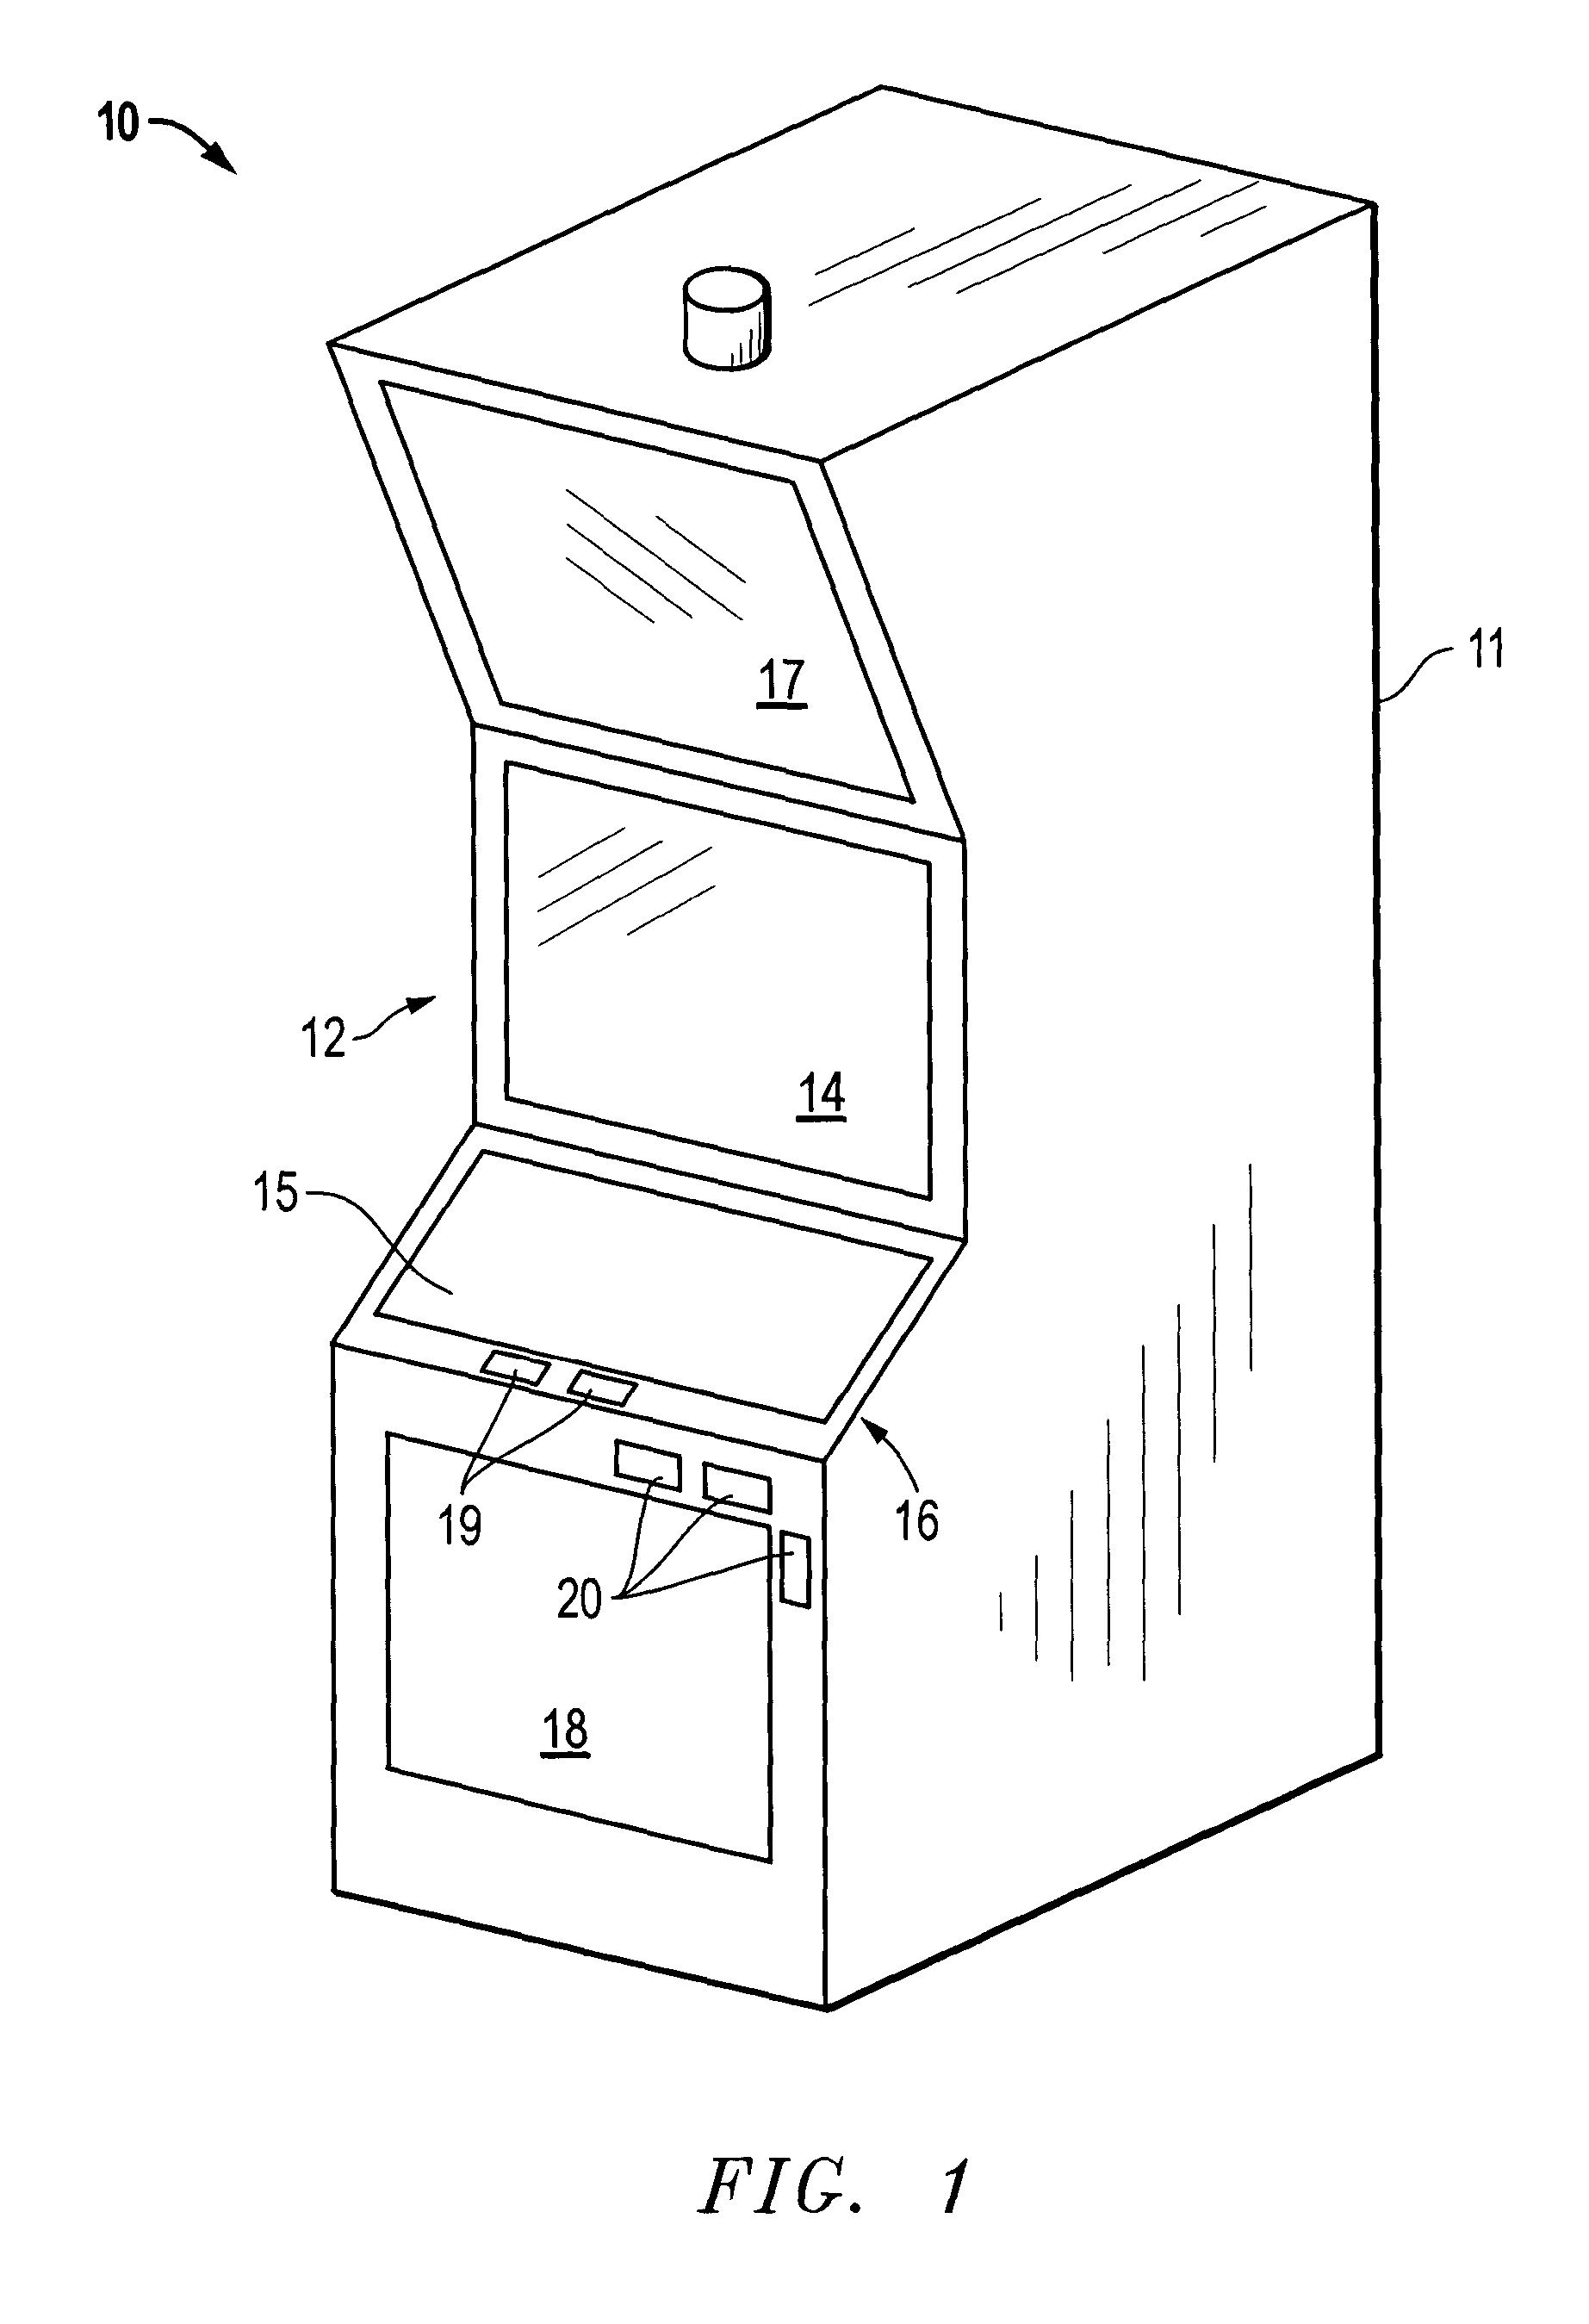 Dynamically configurable gaming system